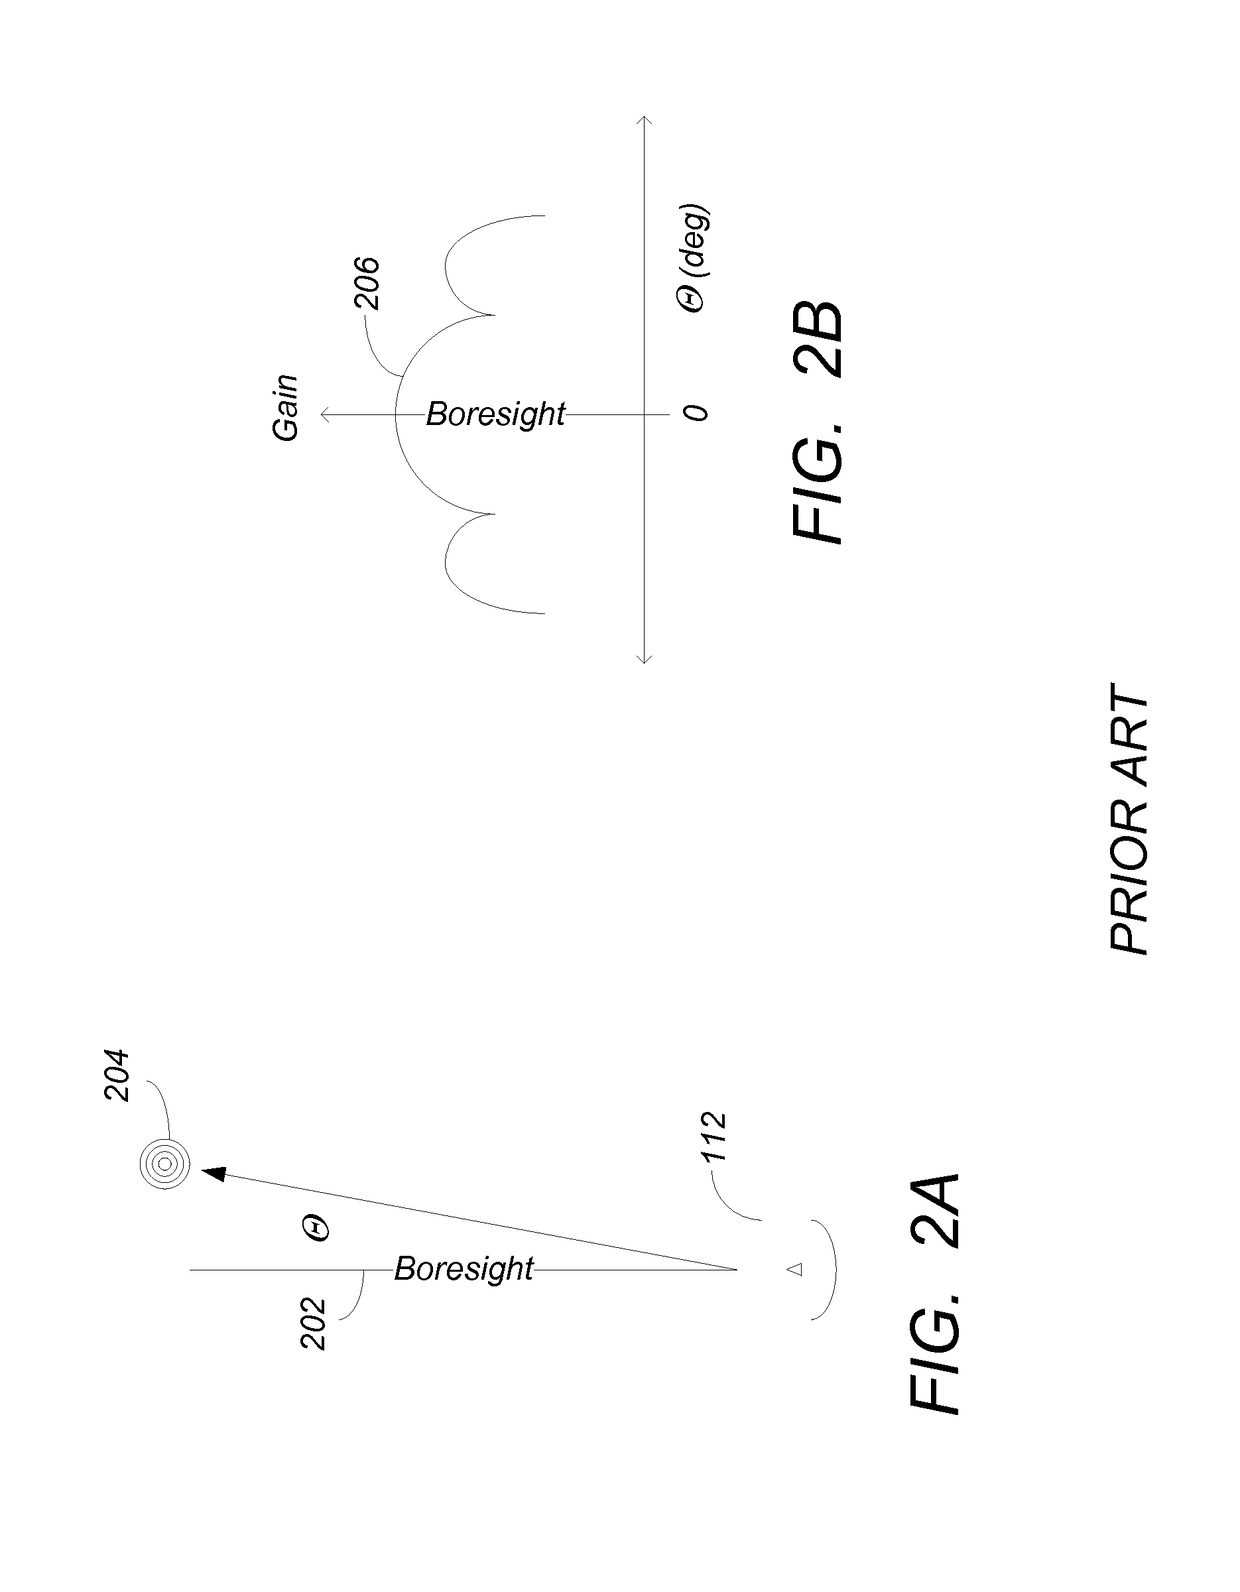 Method and apparatus for rapid and scalable testing of antennas